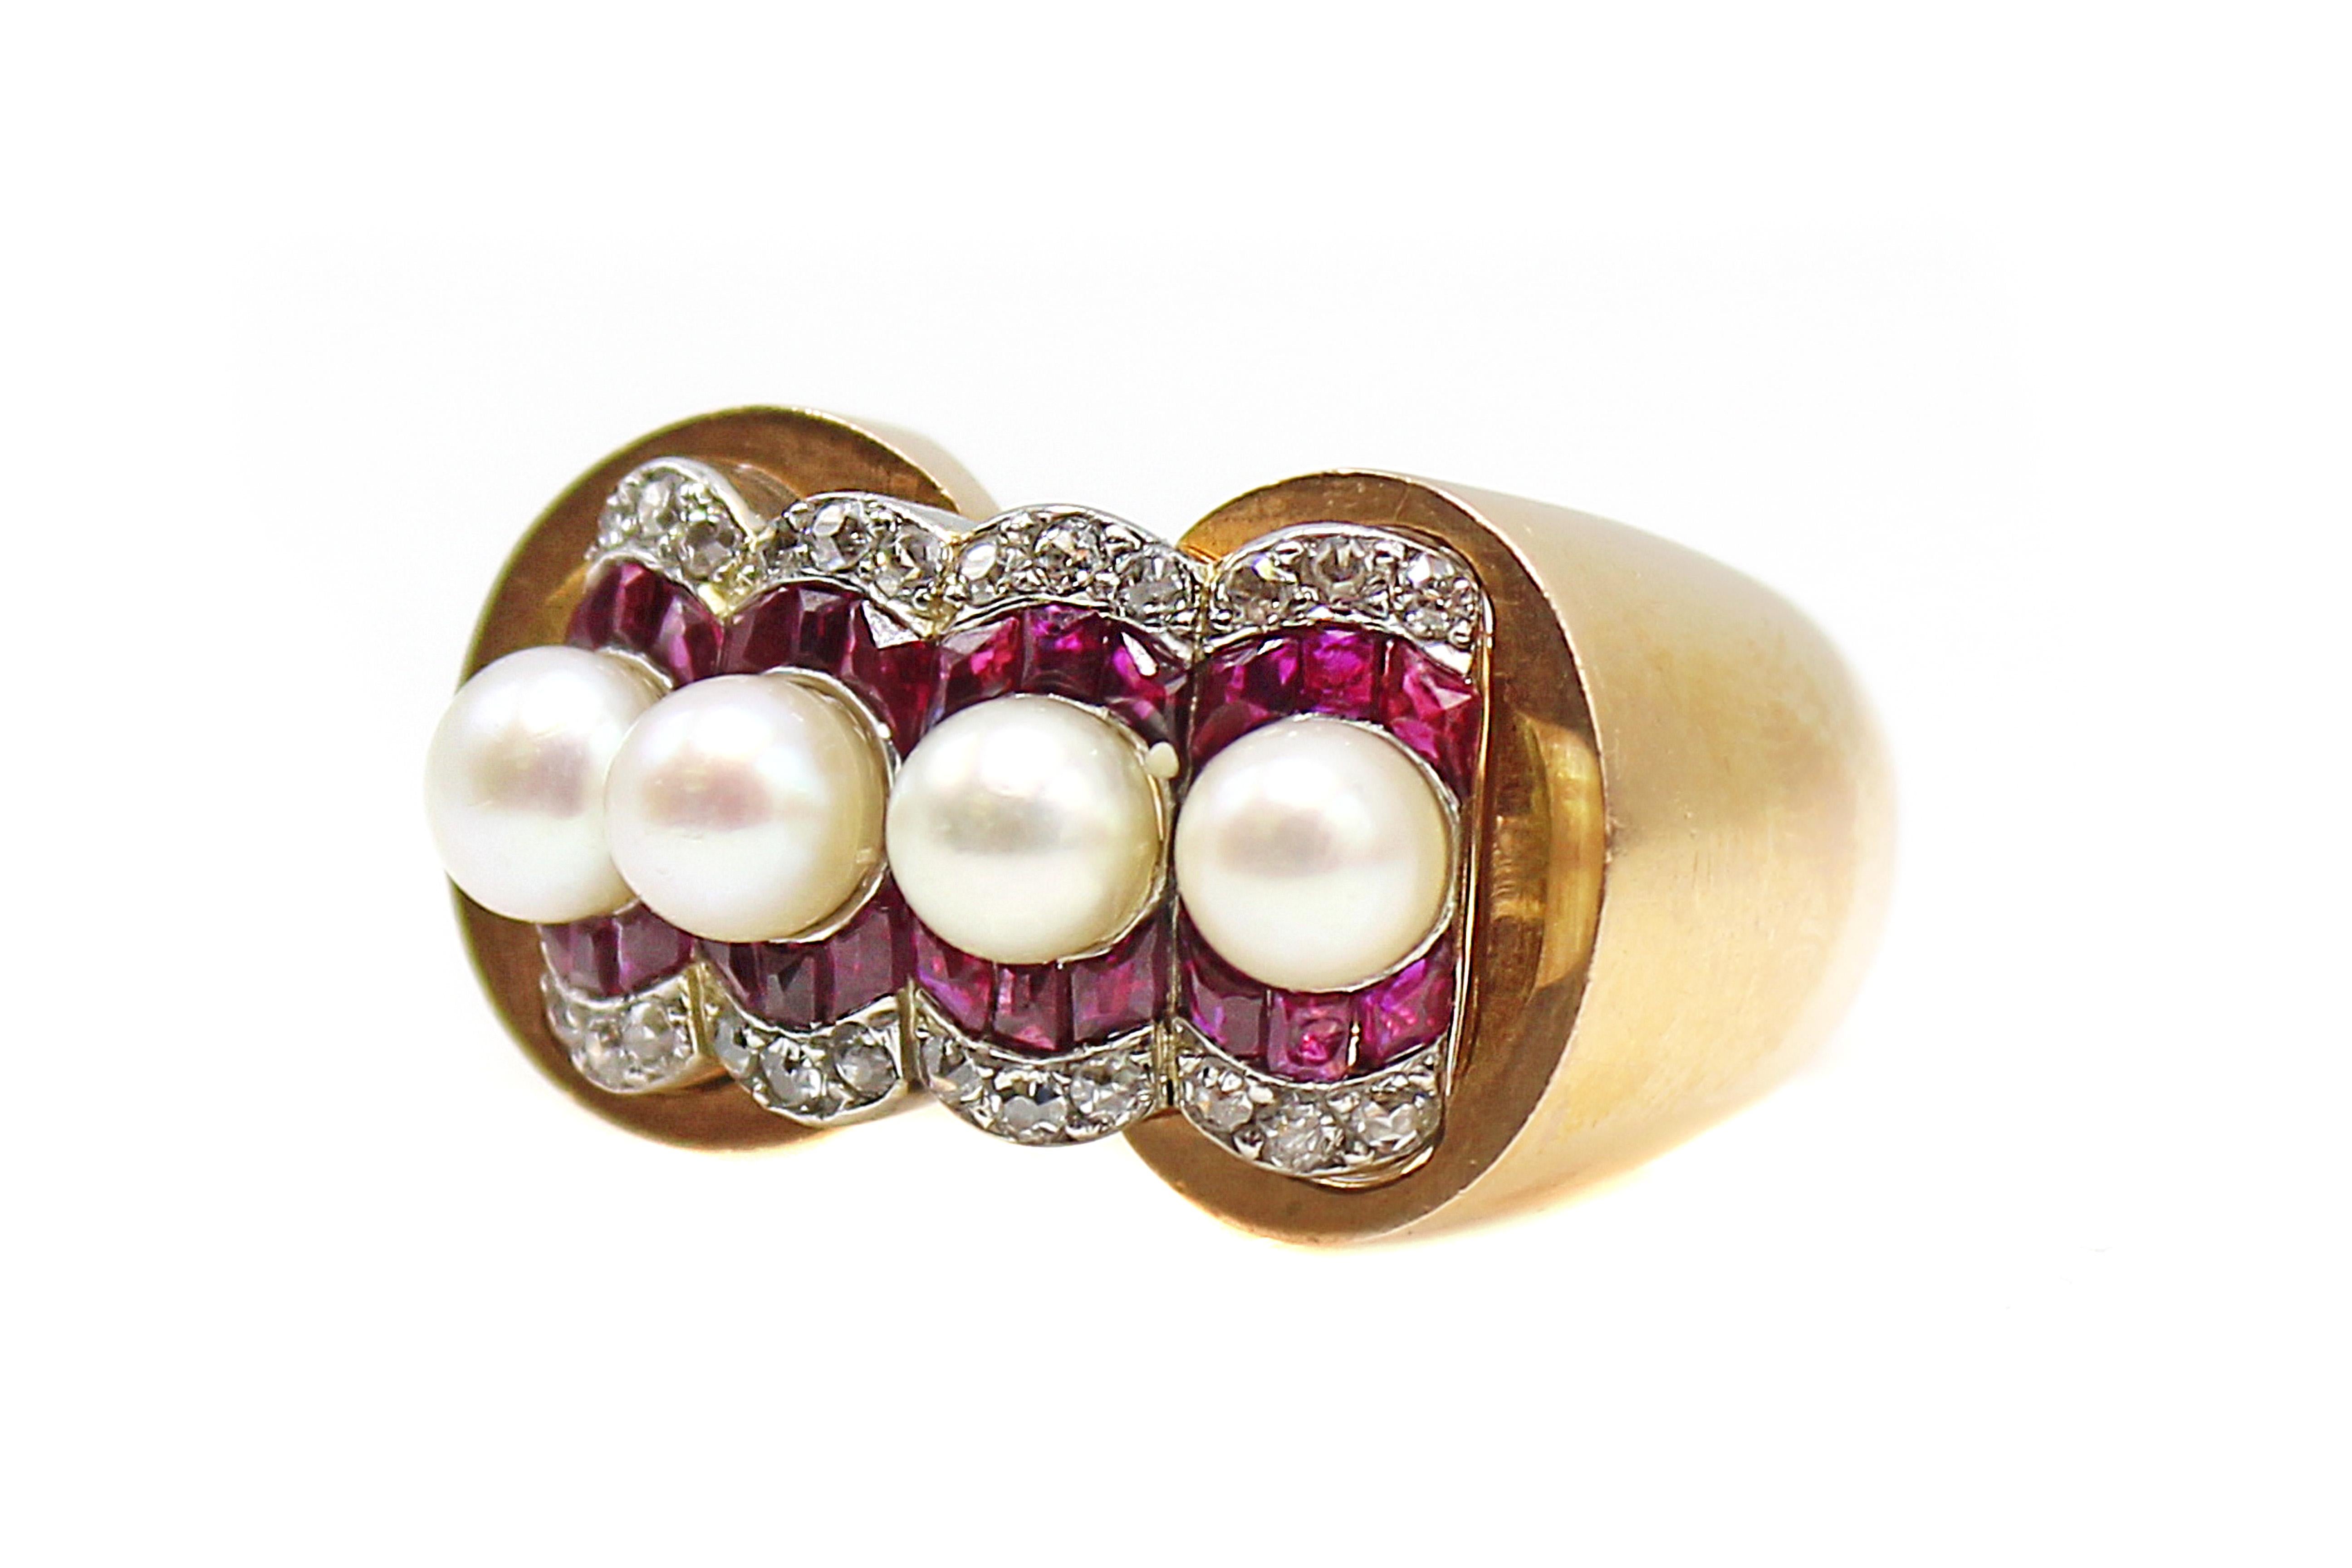 This unique and wonderfully designed Retro ring, from ca 1945 shows the distinct features of its time with its bold geometric and three-dimensional elements. Amazingly well hand-crafted in 18 karat rose gold this ring features 4 well matched pearls